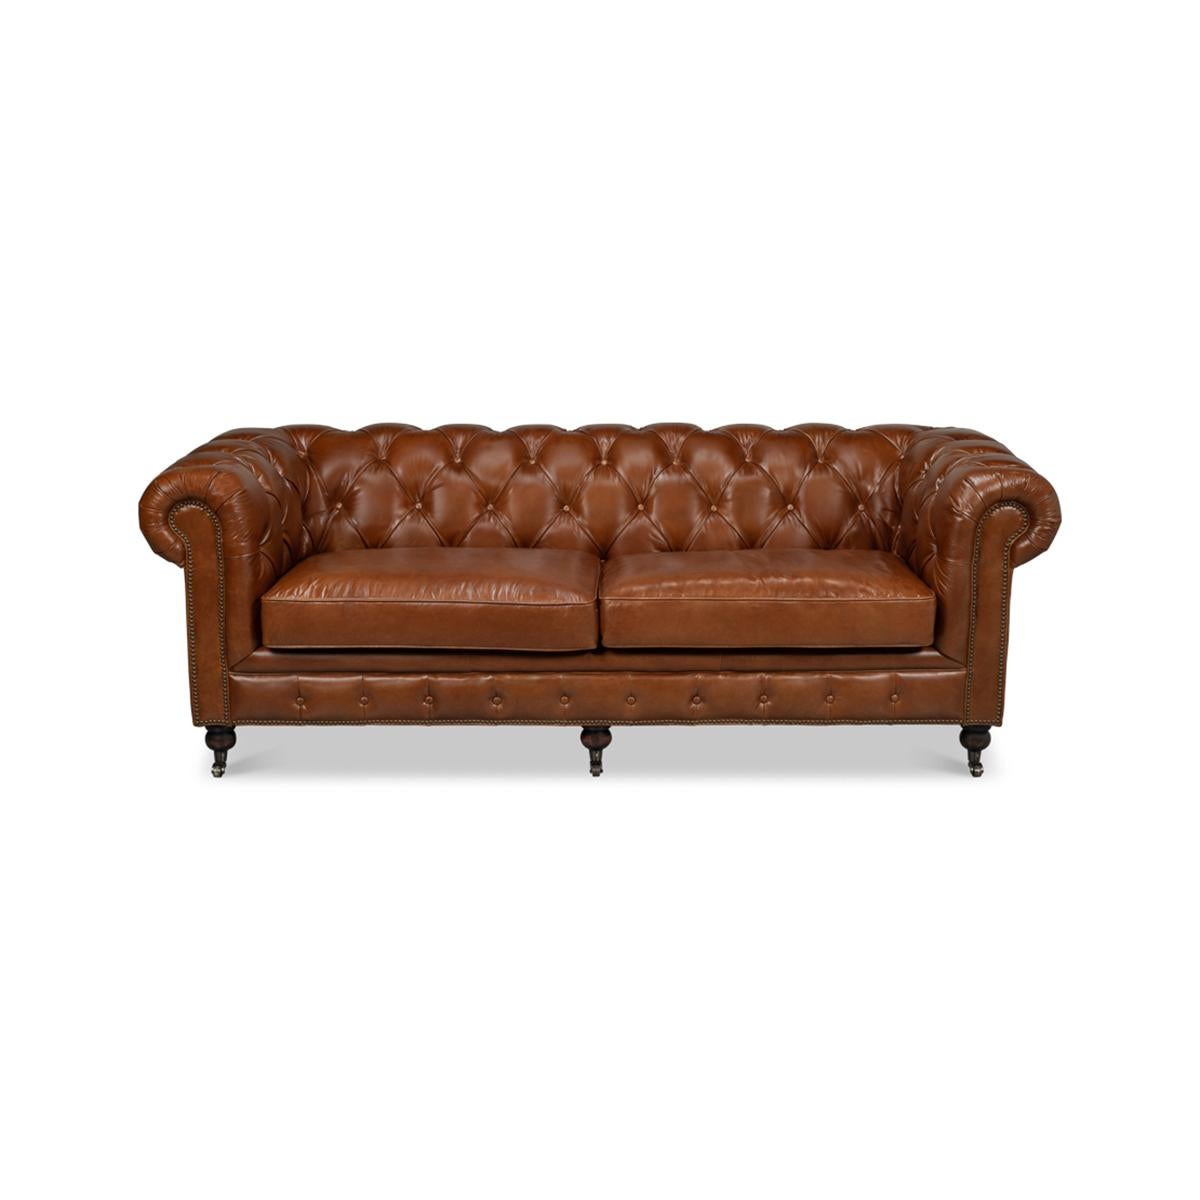 A vintage style Classic English Chesterfield leather upholstered sofa, with top-grain leather in a Havana brown finish. With tufted backrest and rollover arms, with two padded cushions raised on turned mahogany feet with brass casters and finished